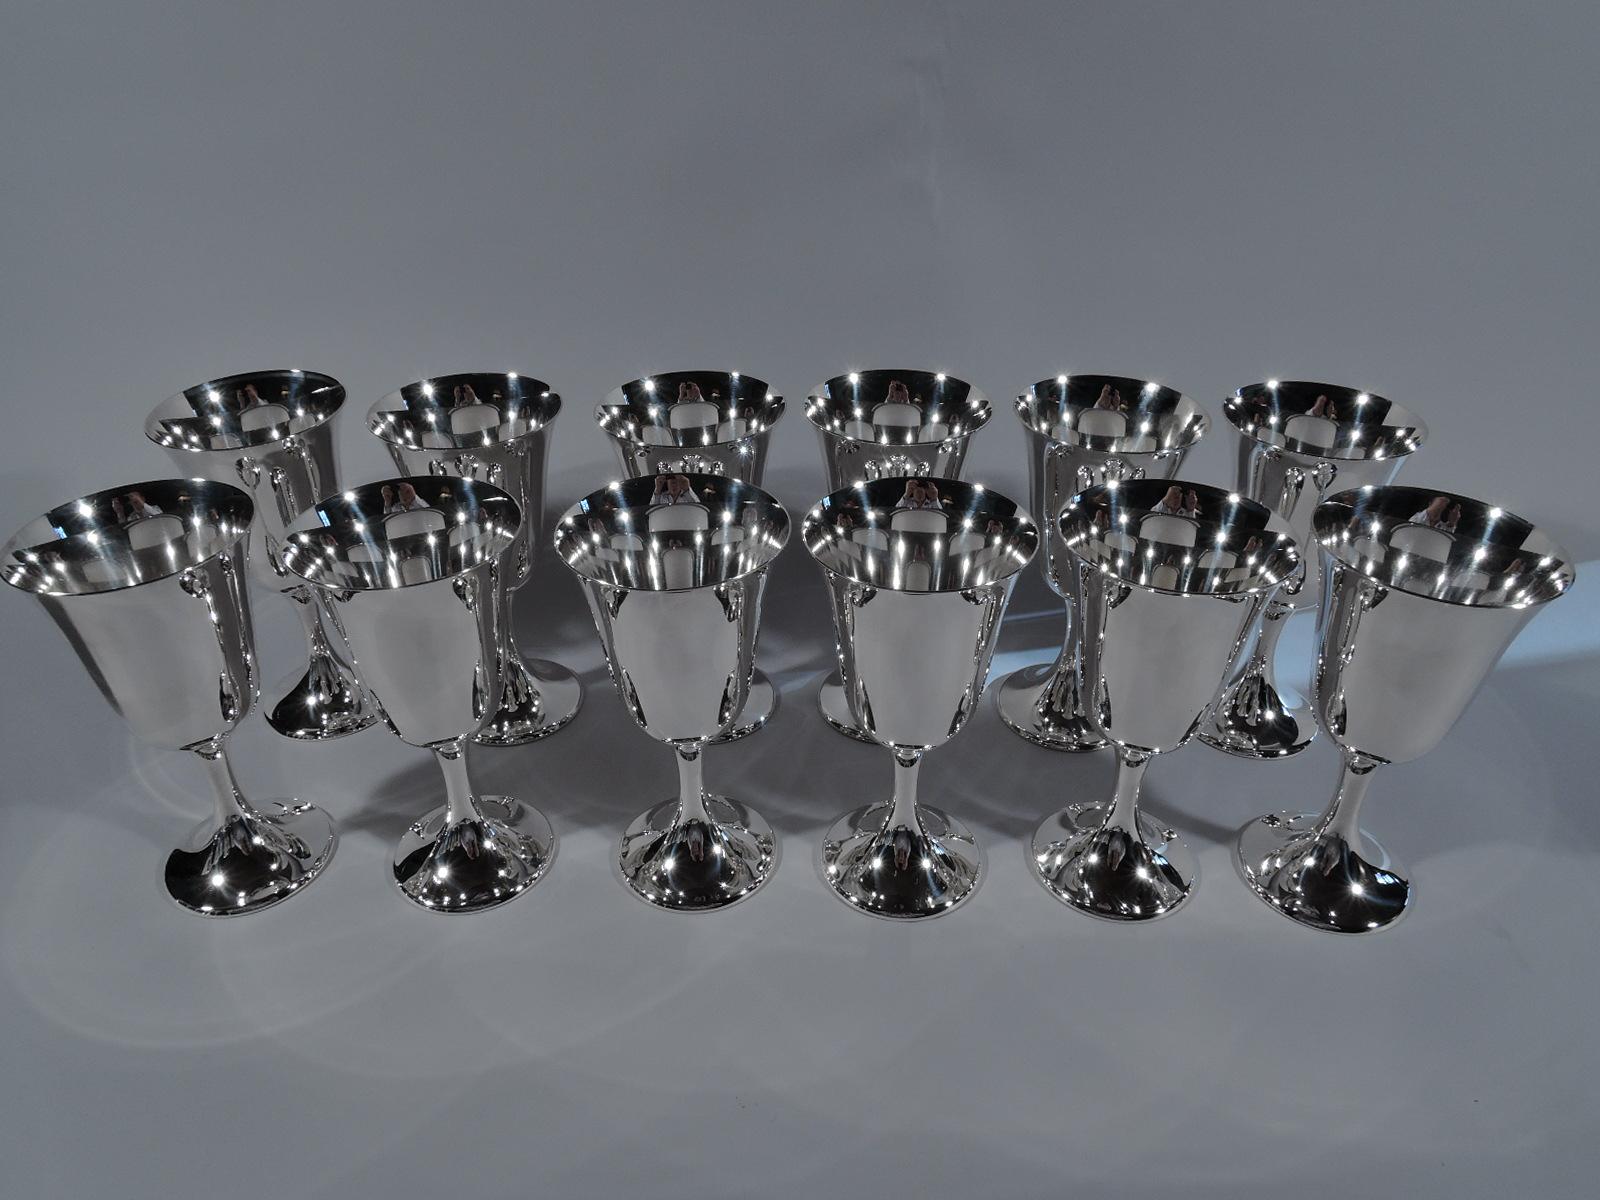 Set of 12 Puritan sterling silver goblets. Made by Gorham in Providence. Each: Spare and elegant form with subtle bell-form bowl on cylindrical stem flowing into raised foot. Works best when filled and refilled. Don’t be fooled by the pattern name.